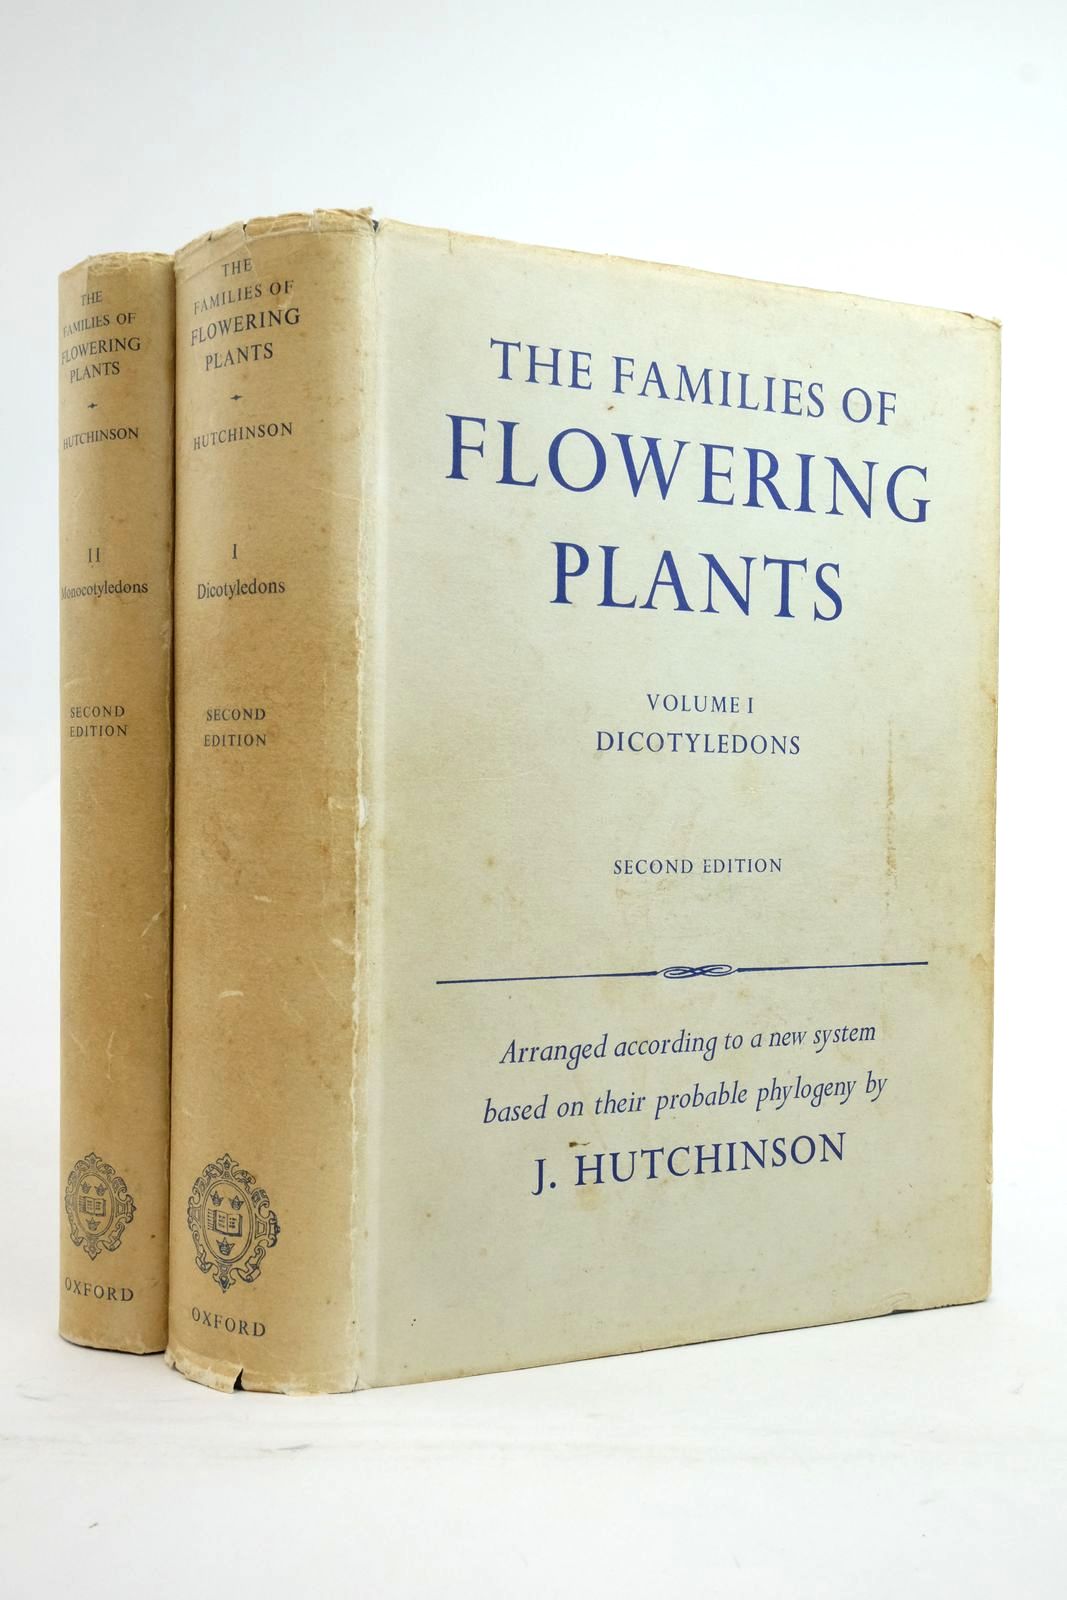 Photo of THE FAMILIES OF FLOWERING PLANTS (2 VOLUMES) written by Hutchinson, J. published by Oxford at the Clarendon Press (STOCK CODE: 2136439)  for sale by Stella & Rose's Books